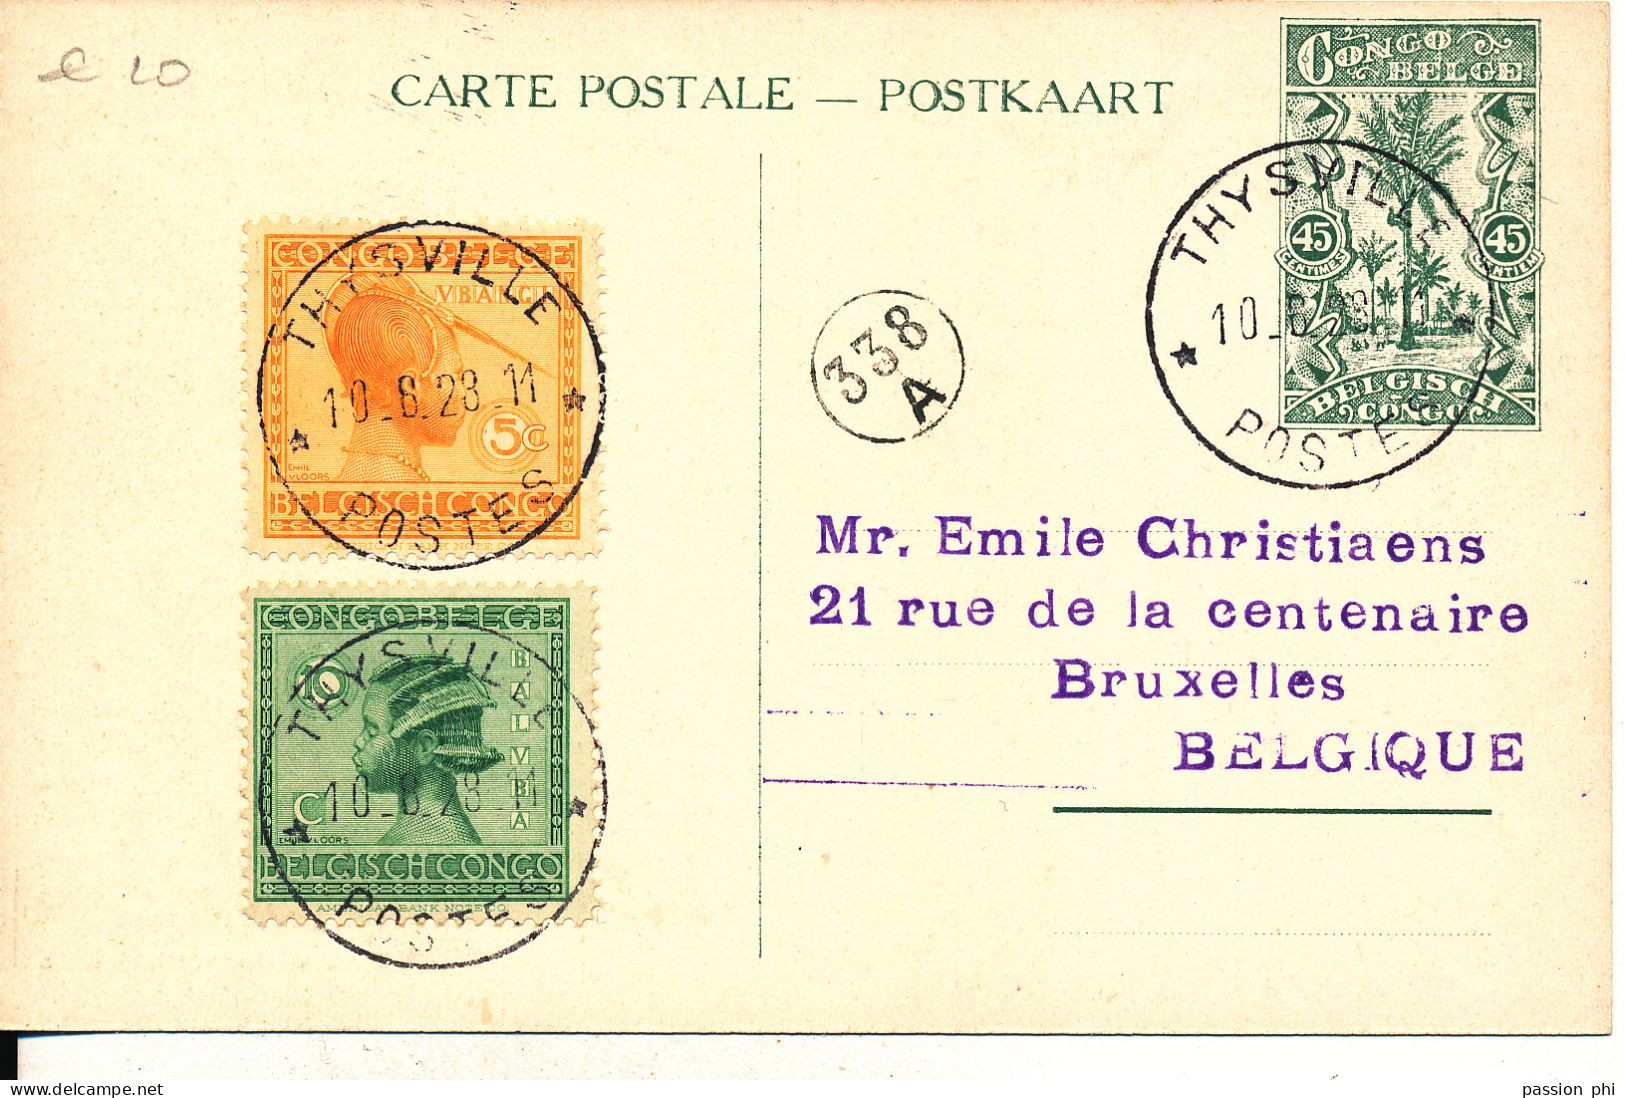 BELGIAN CONGO 1912 ISSUE PPS SBEP 66a VIEW 40 USED - Enteros Postales